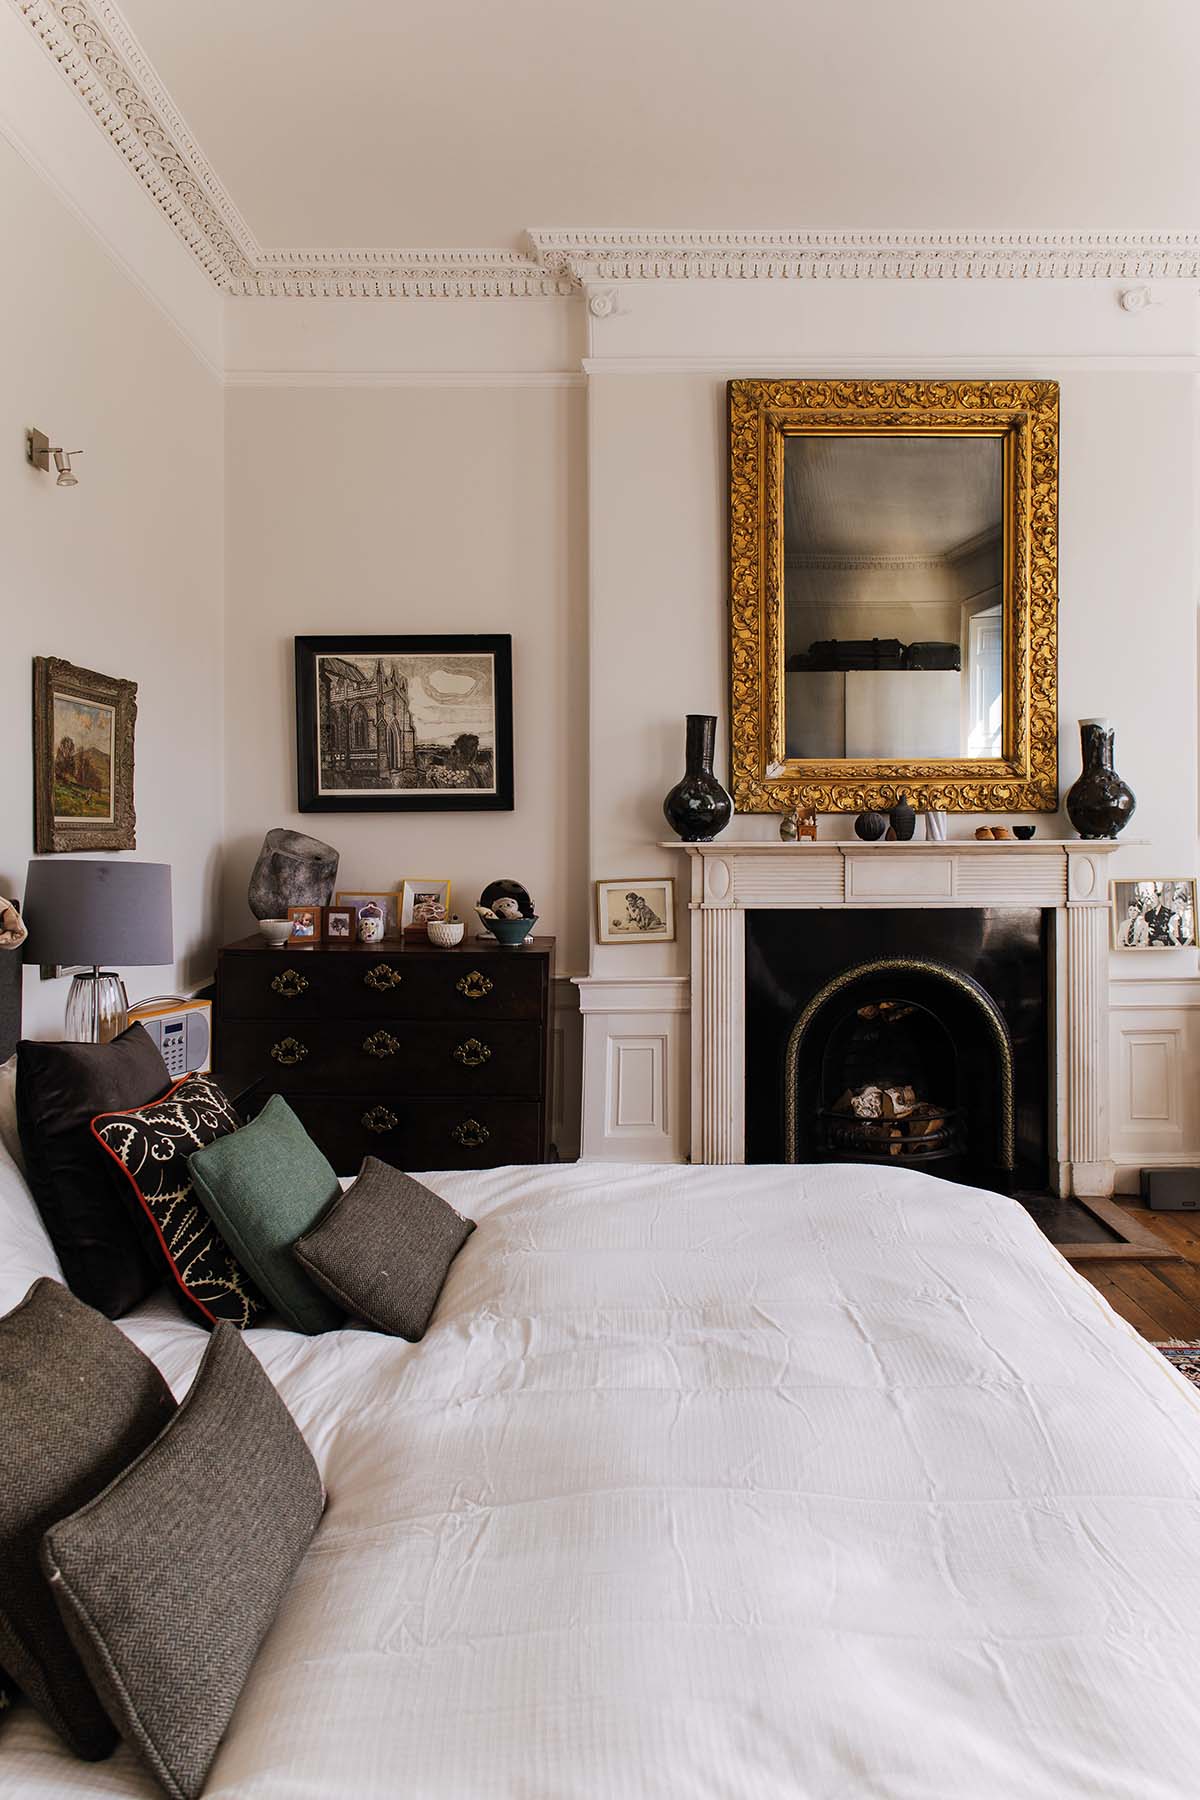 A bedroom with a large bed, fireplace and art on the walls